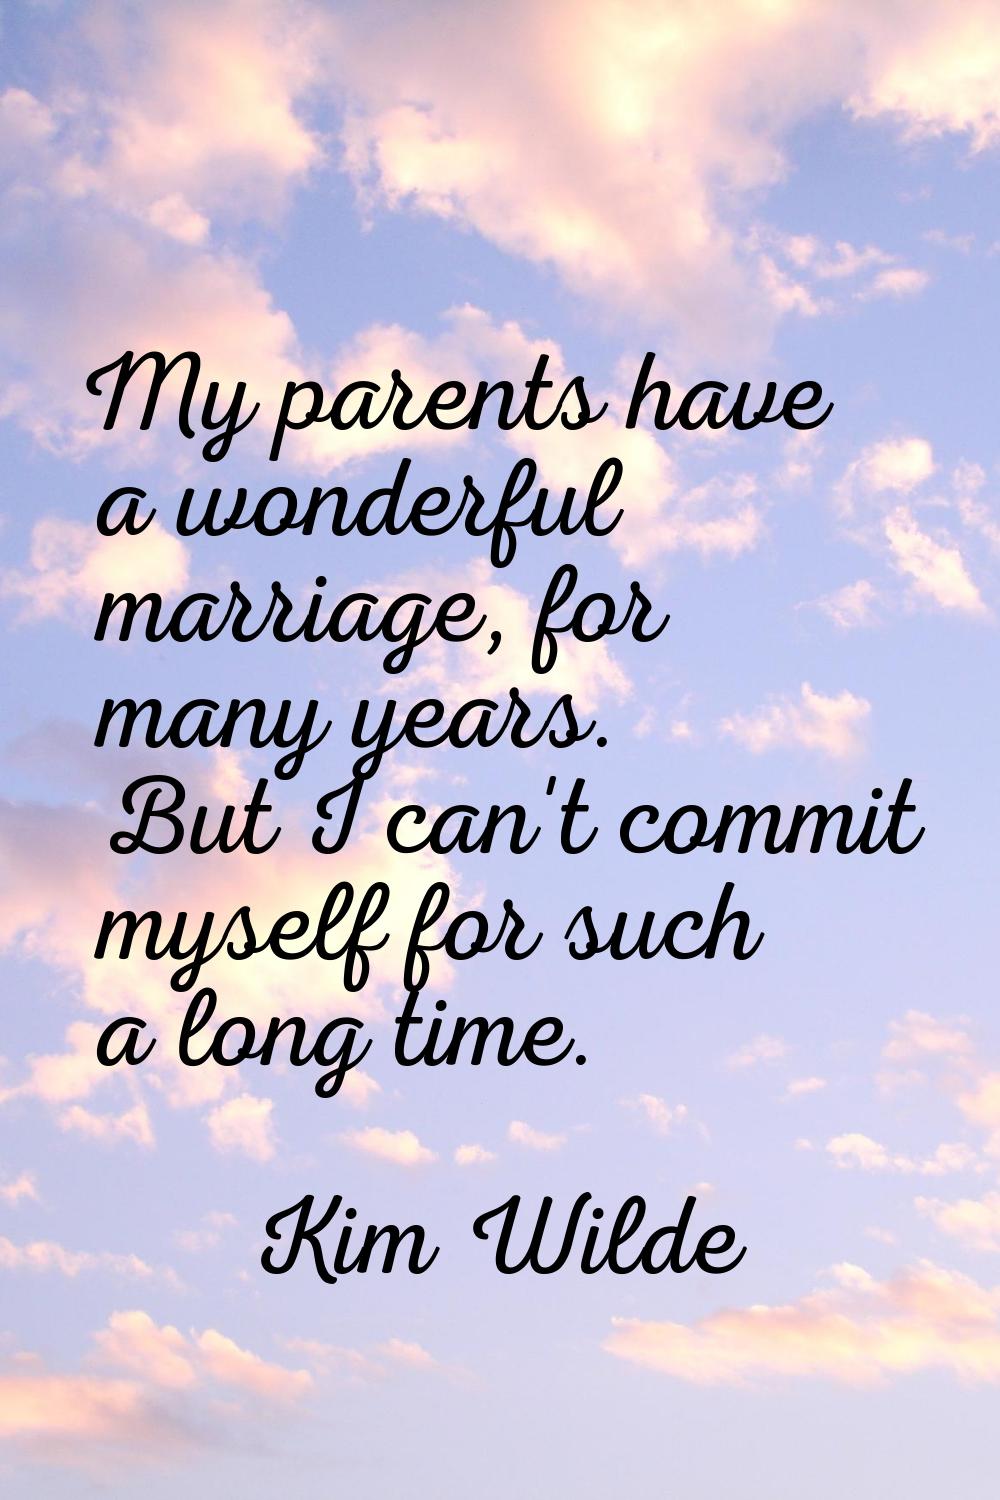 My parents have a wonderful marriage, for many years. But I can't commit myself for such a long tim